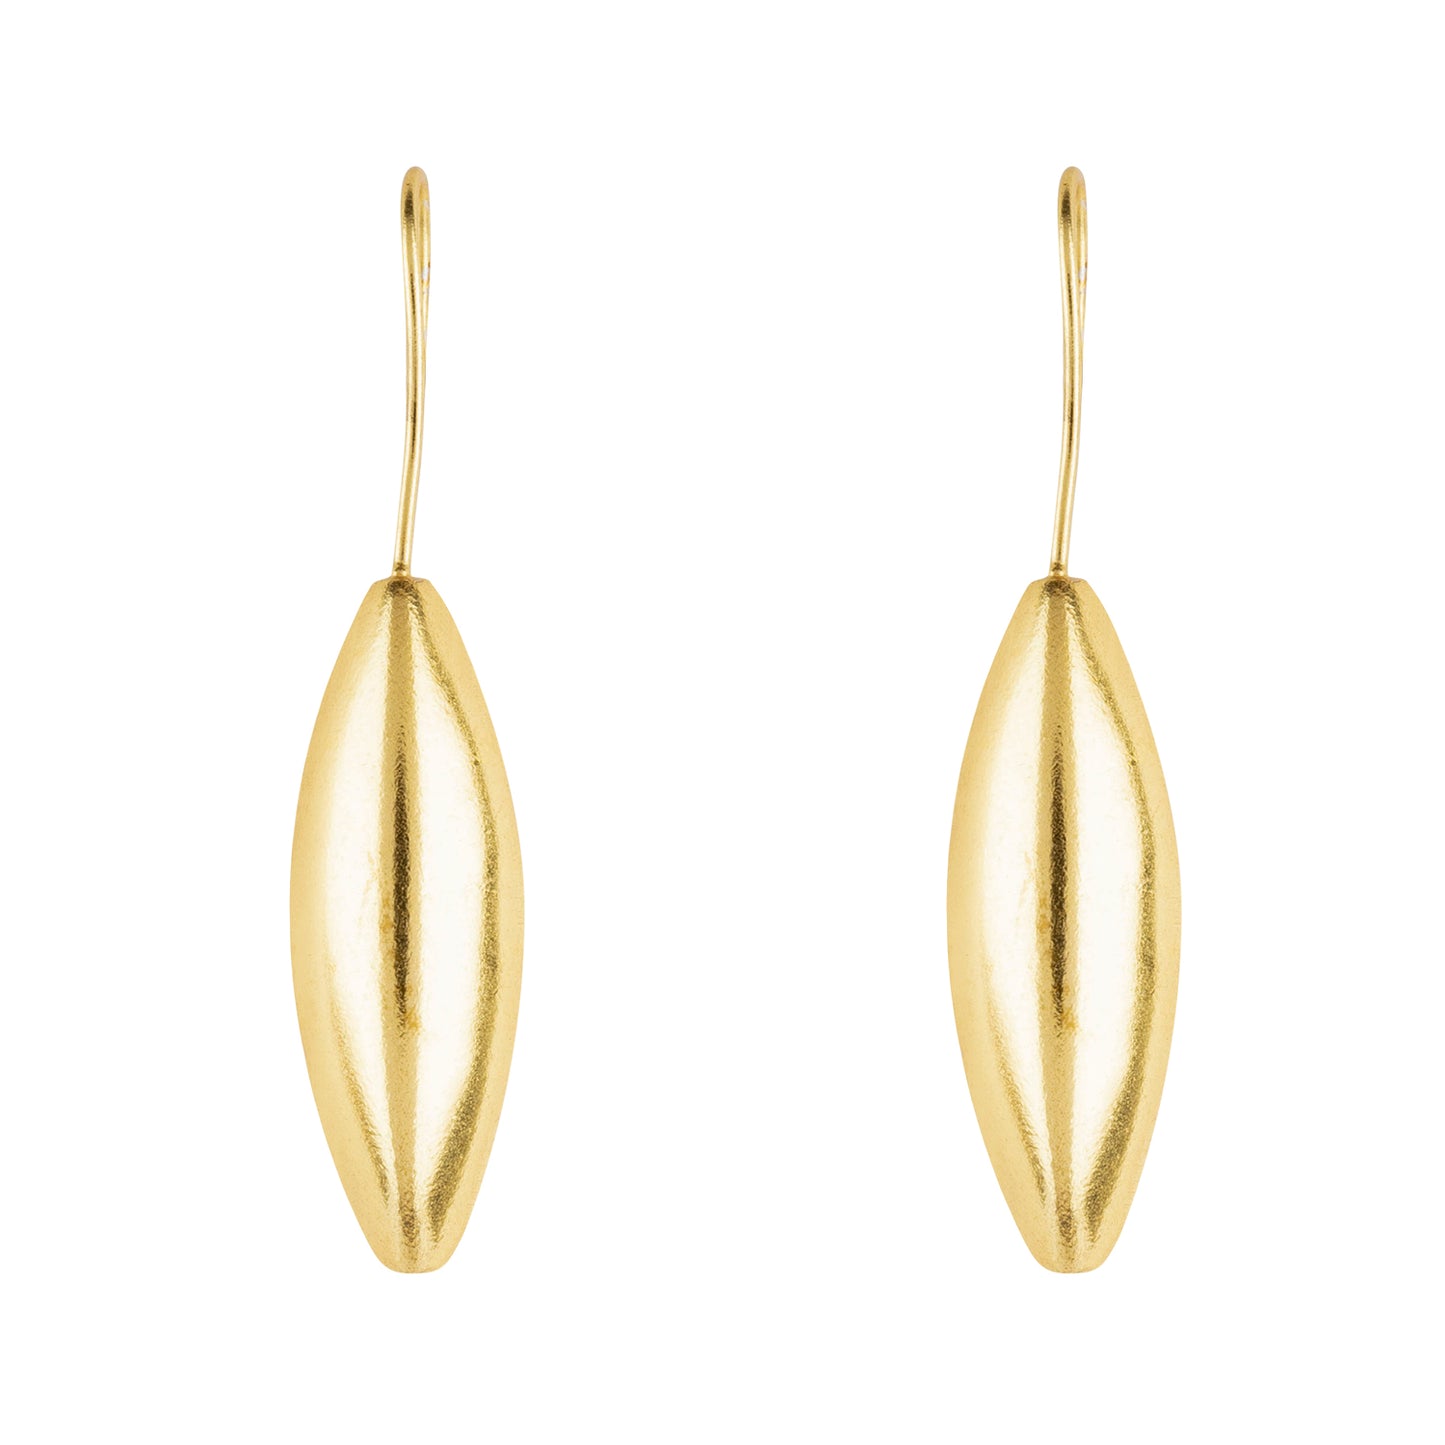 Gold Plated Everyday Wear Light Weight Bud Earrings